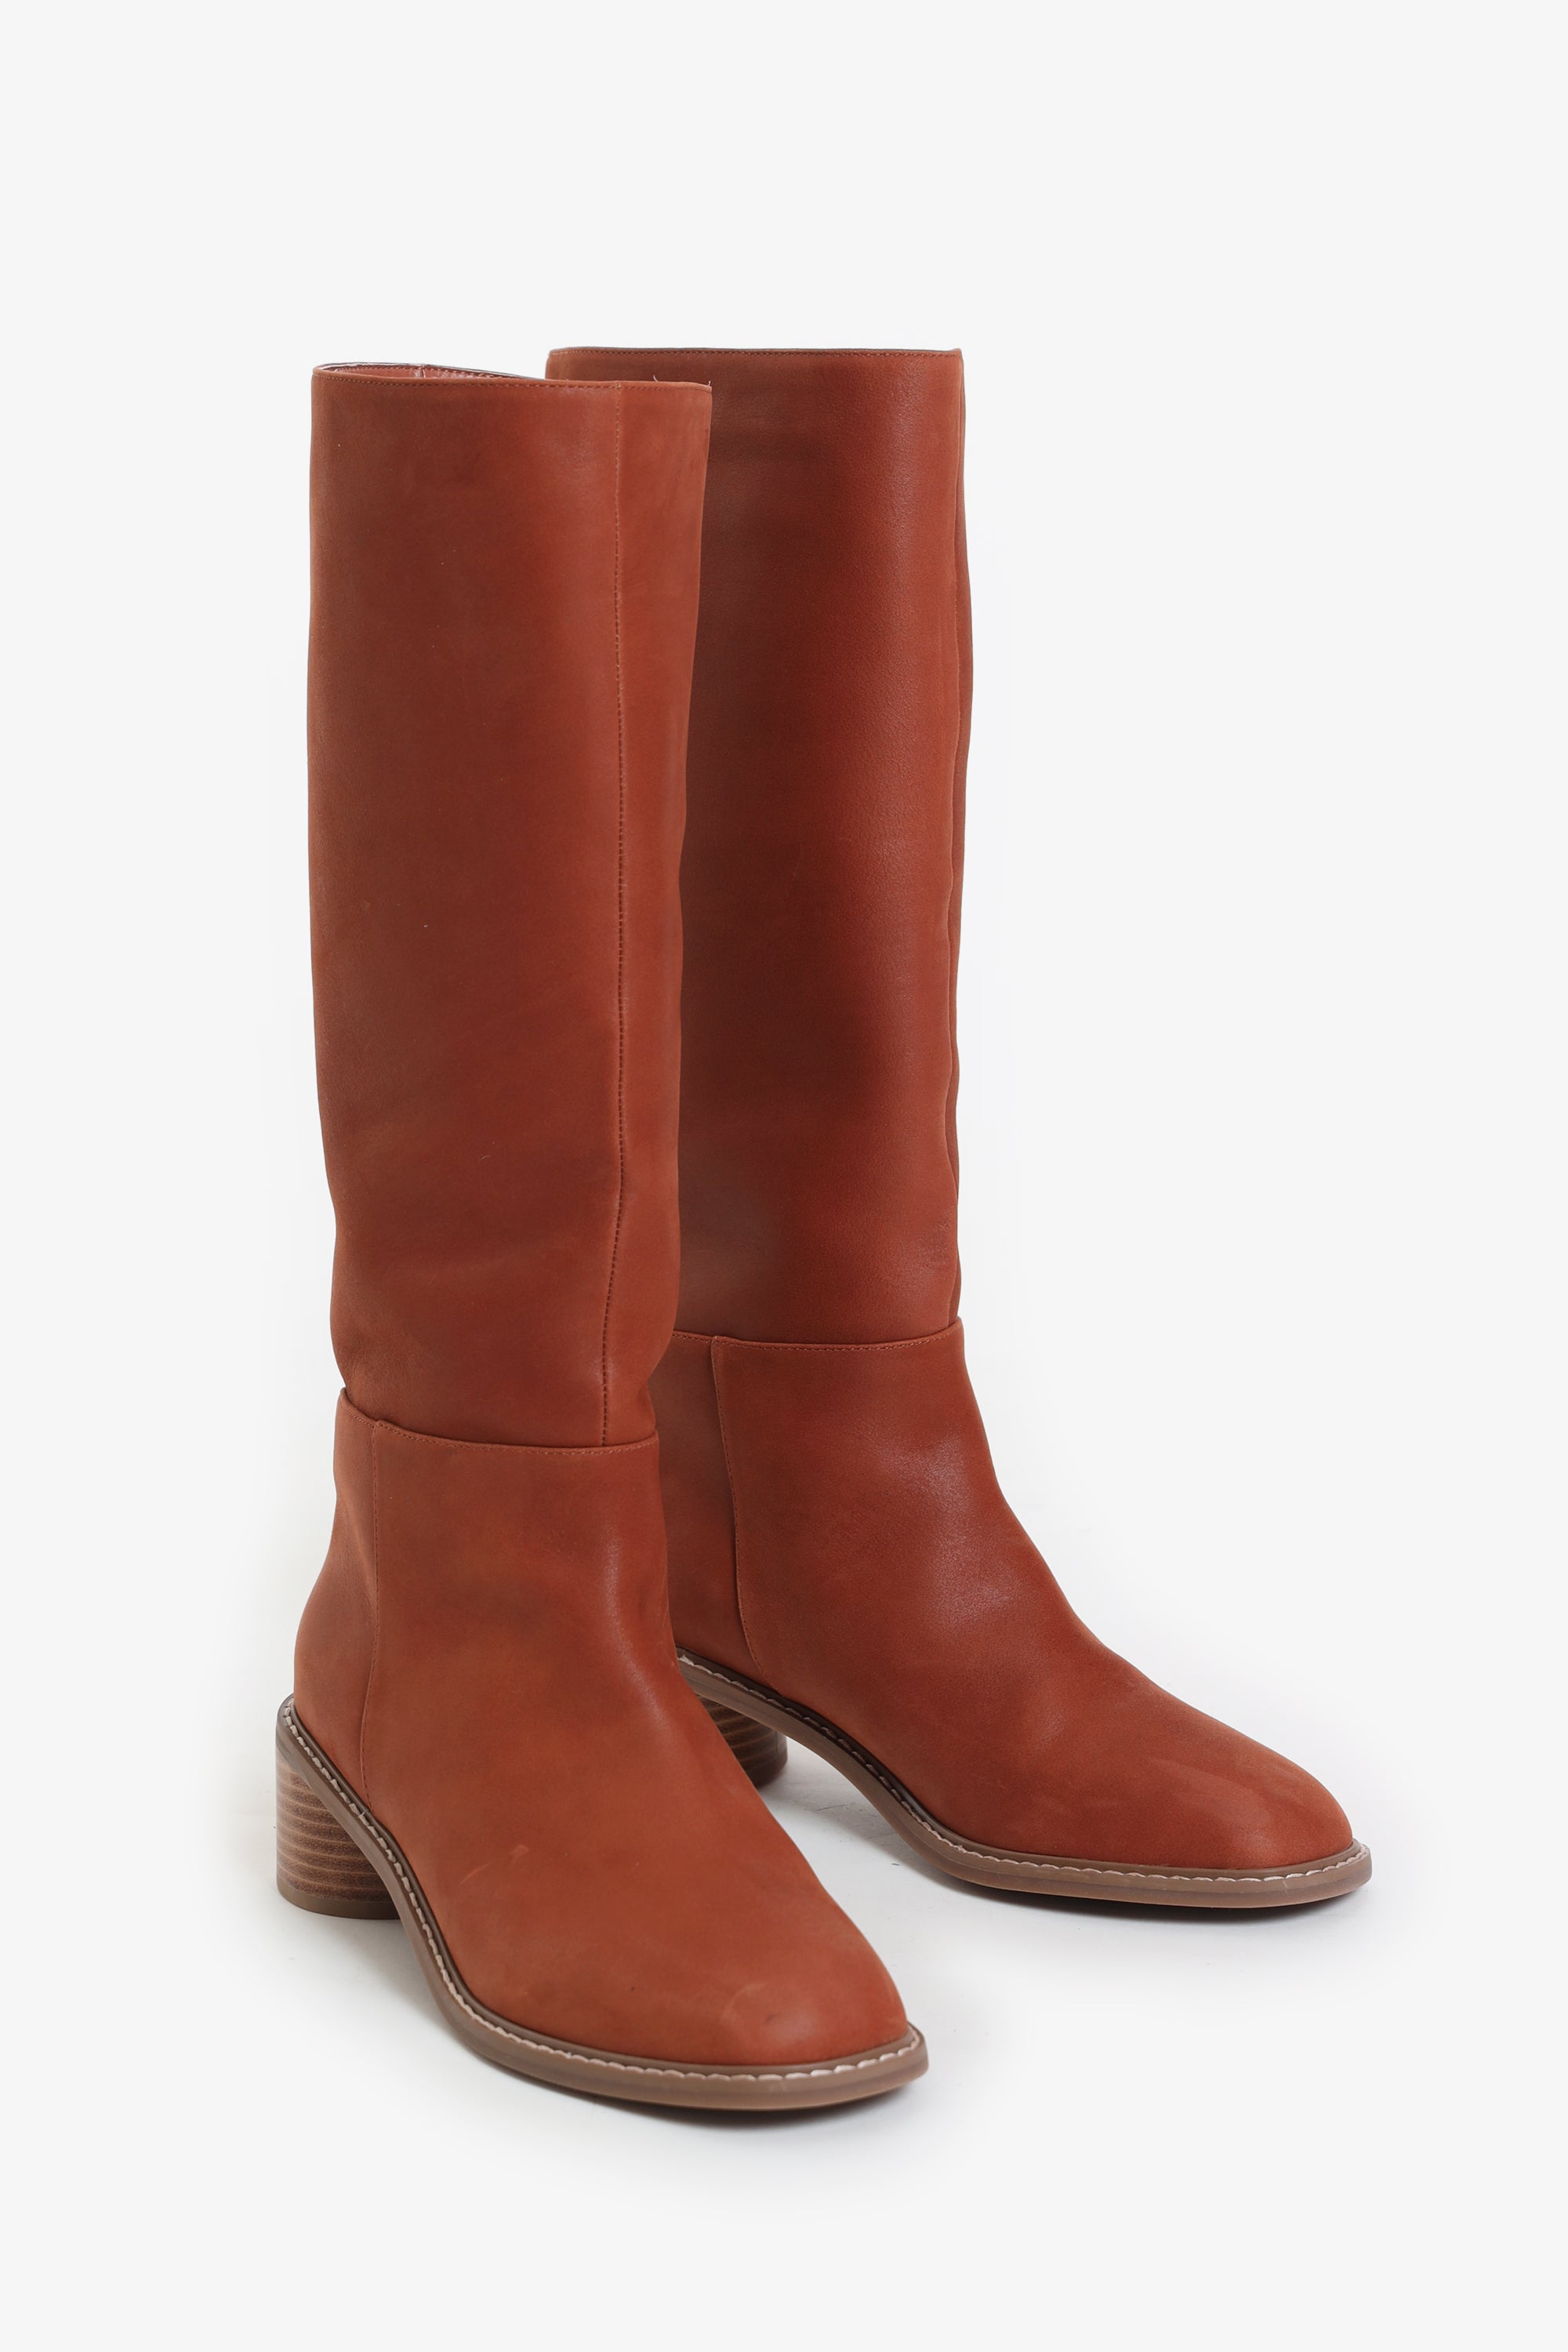 tall brown boots